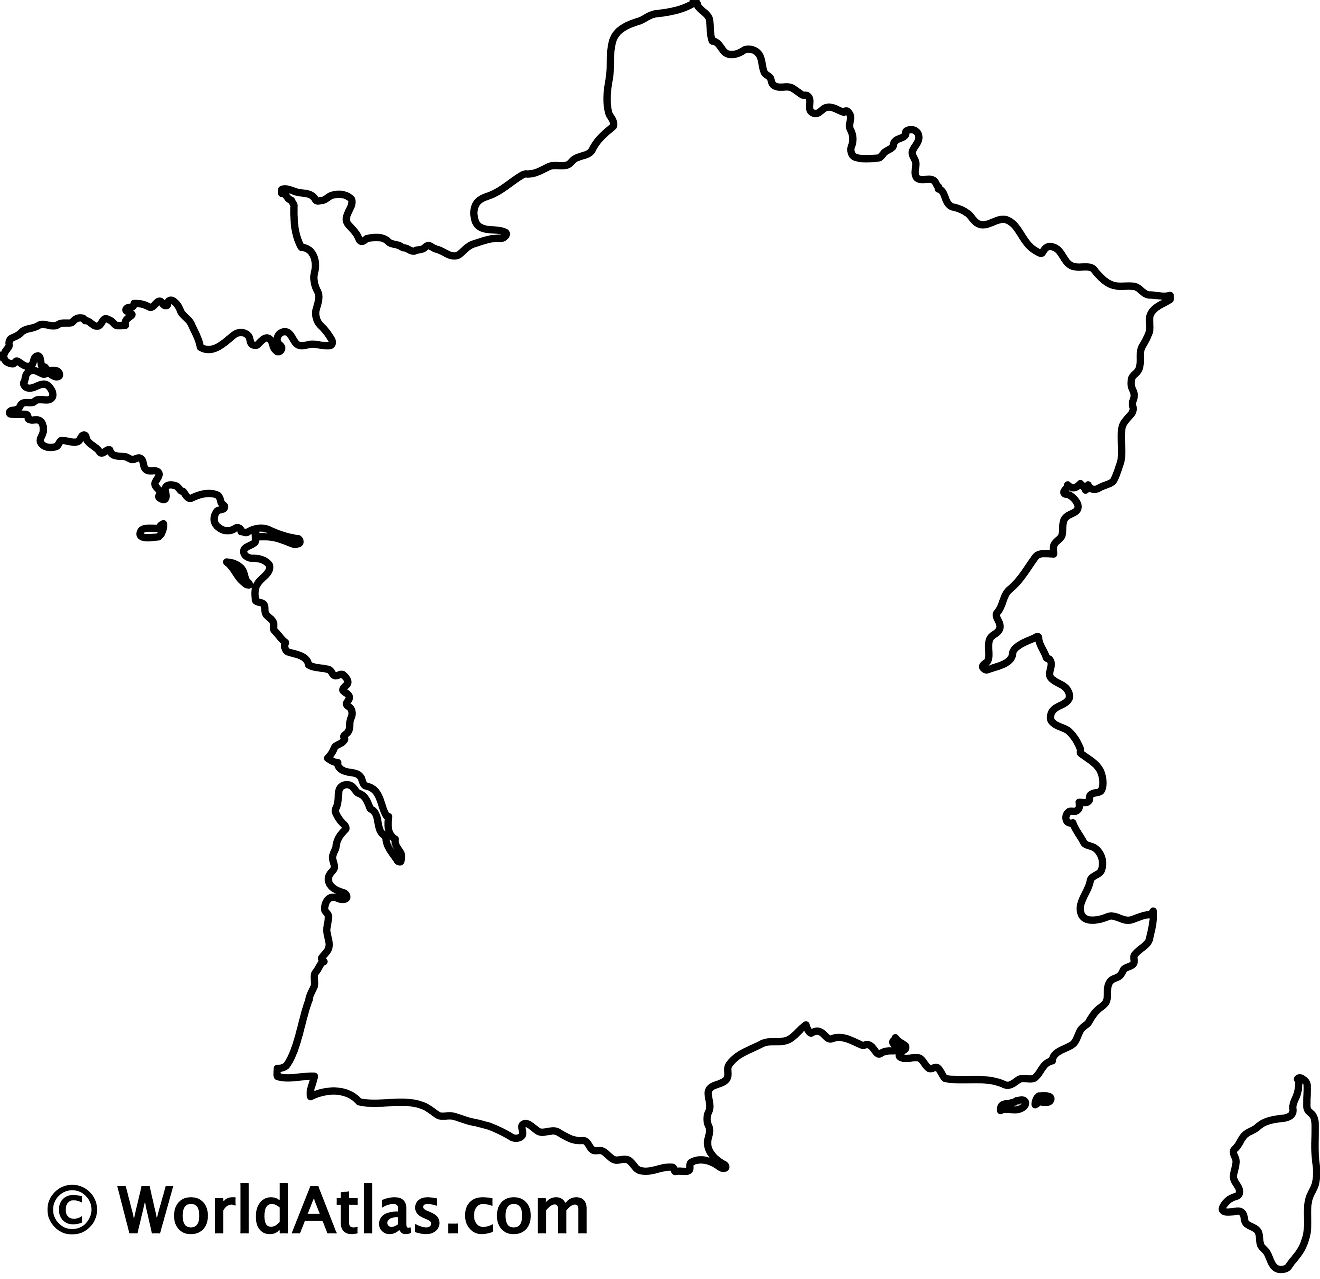 Blank Outline Map of France